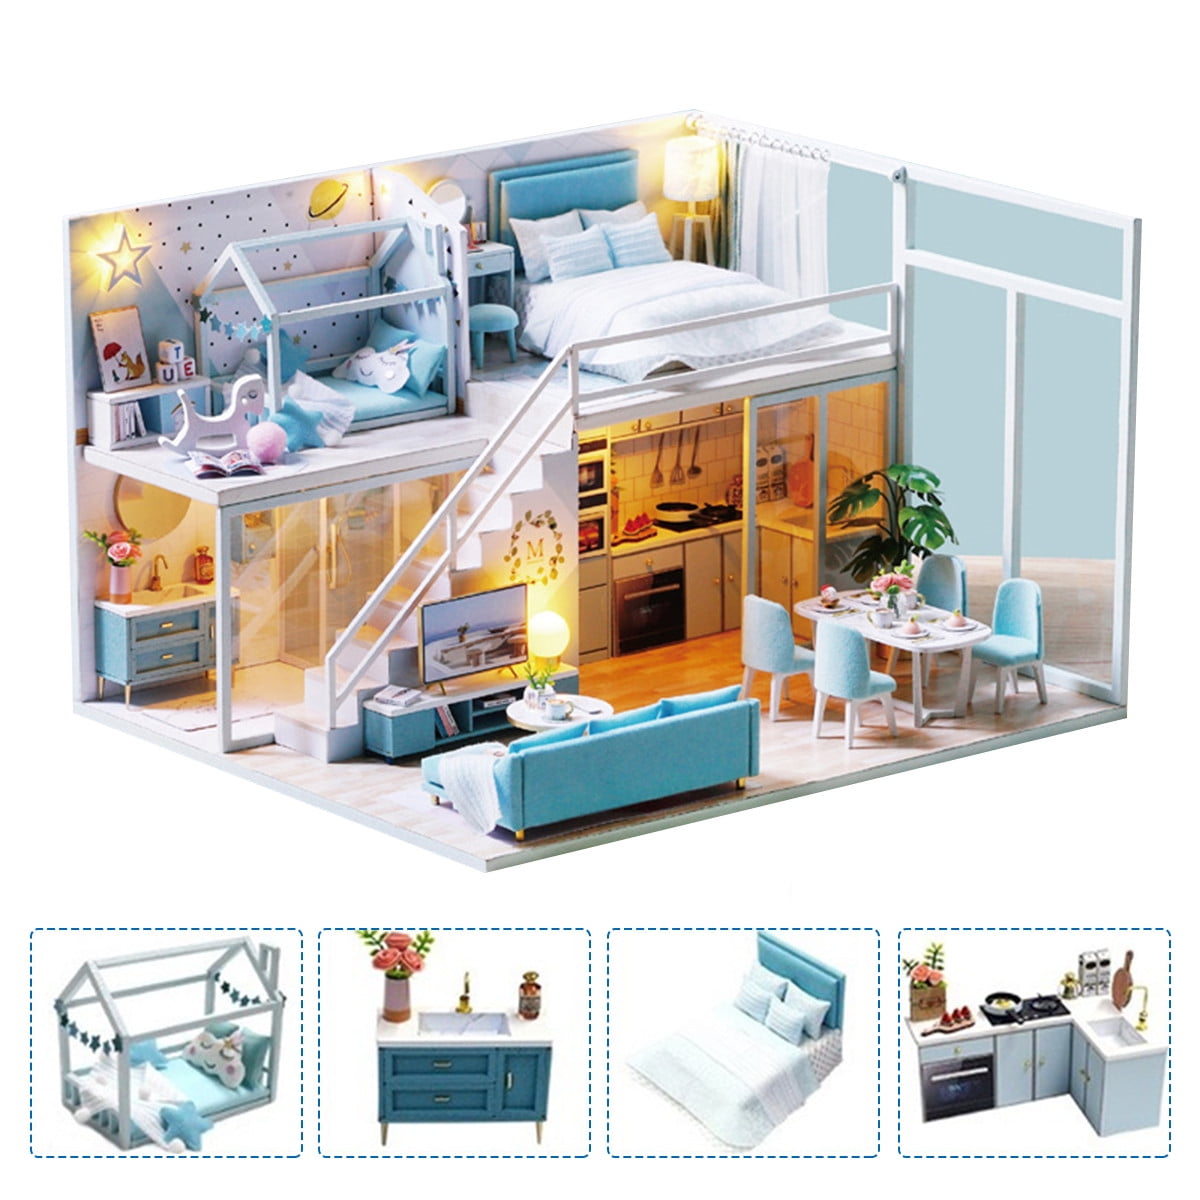 Dollhouse Miniature with Furniture,DIY 3D Wooden Doll House Kit Chinese Style Plus with Dust Cover and Music Movement,1:24 Scale Creative Room Idea Best Gift for Children Friend Lover M029 